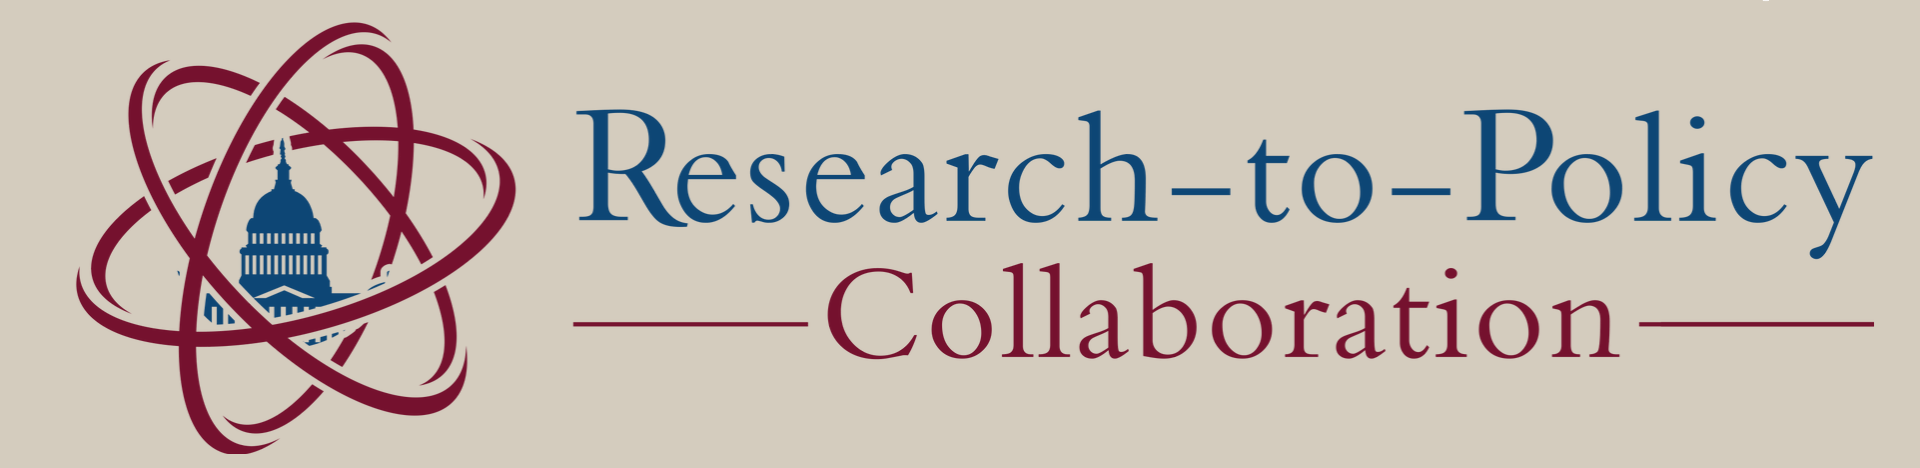 Research to Policy Collaboration Logo